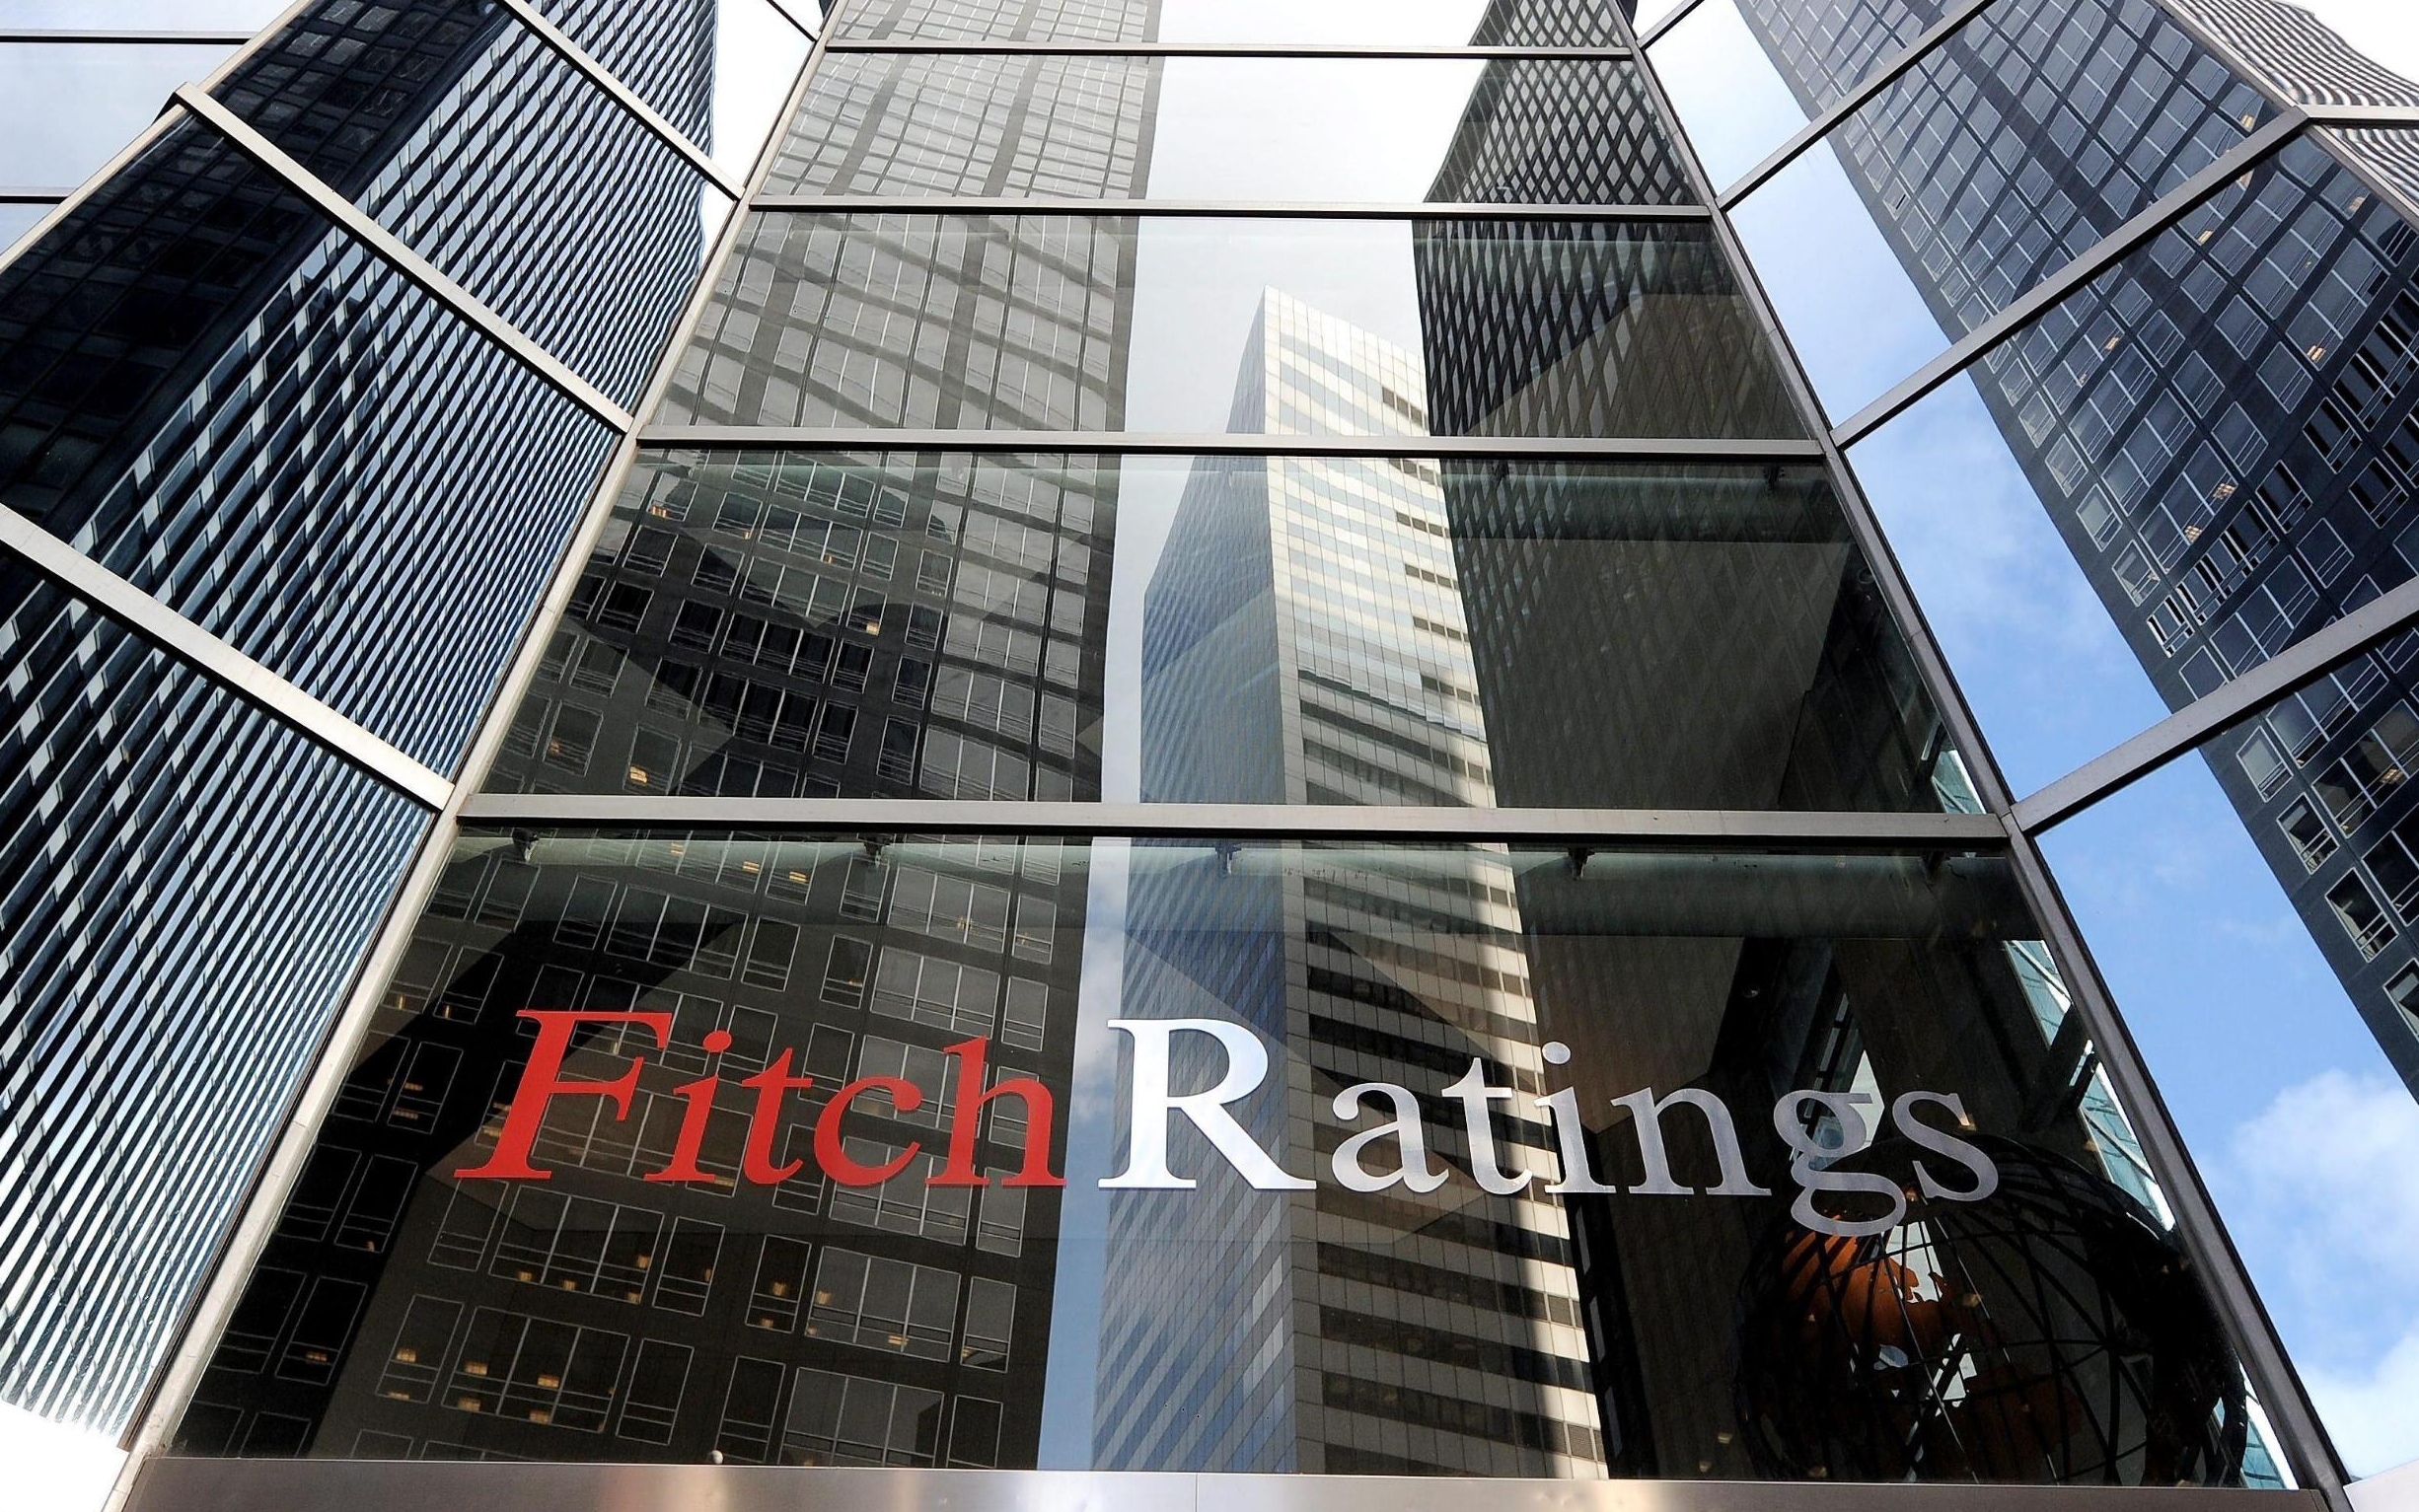 Russia, Fitch downgrades rating to C from B: “Imminent default risk”